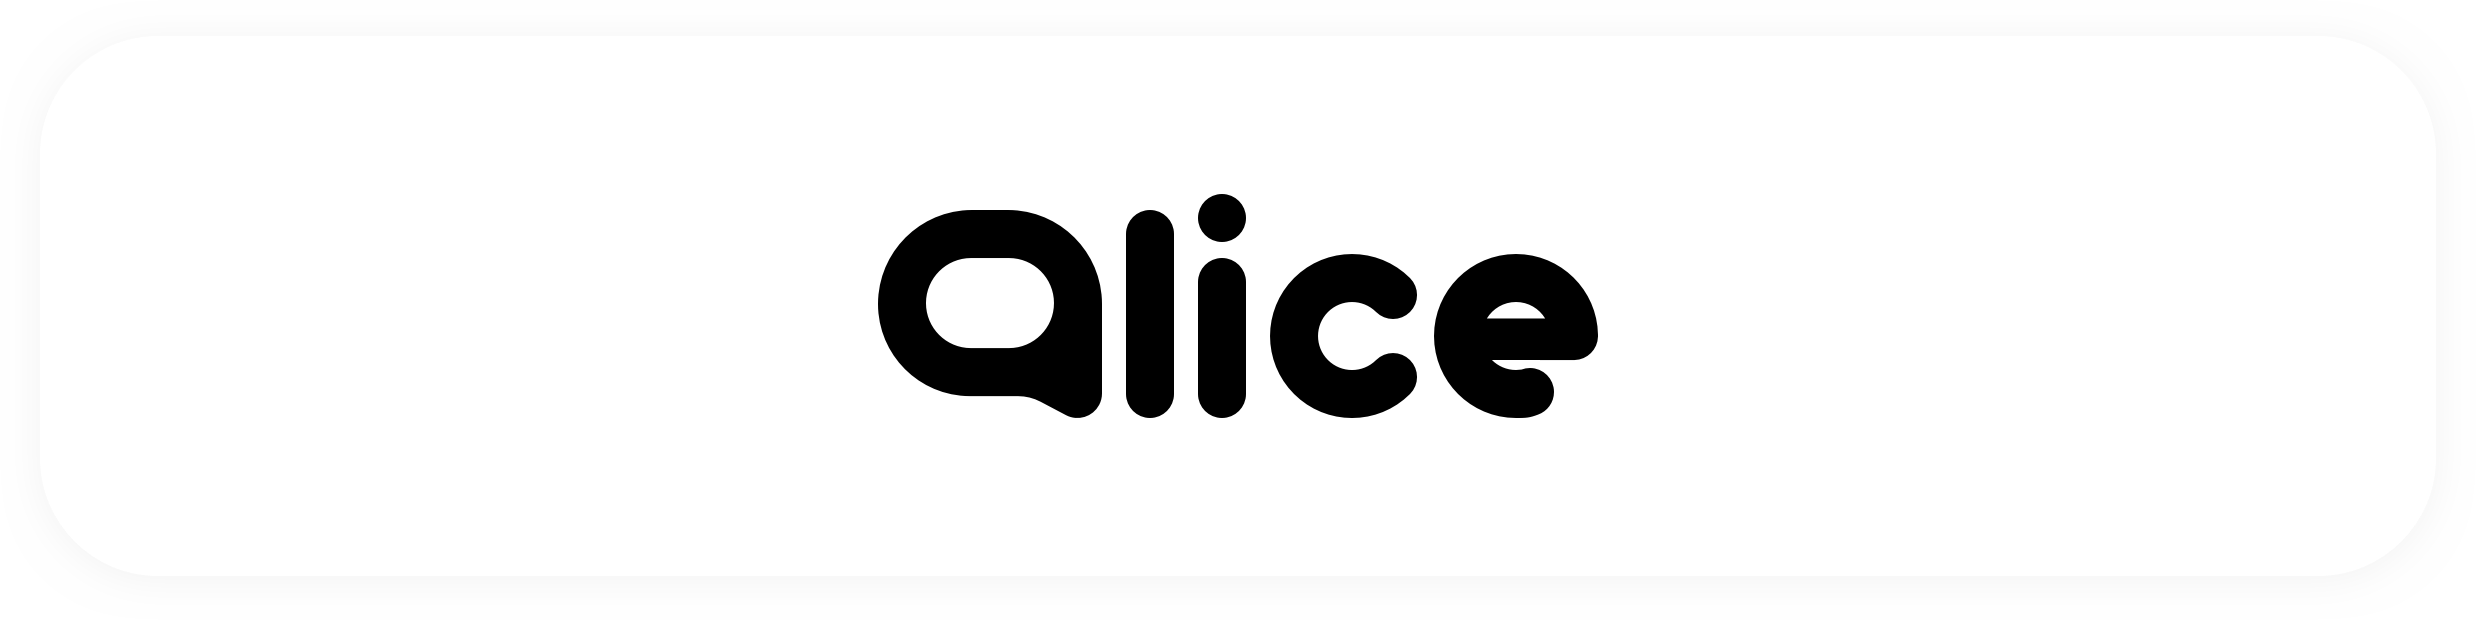 alice-banner.png